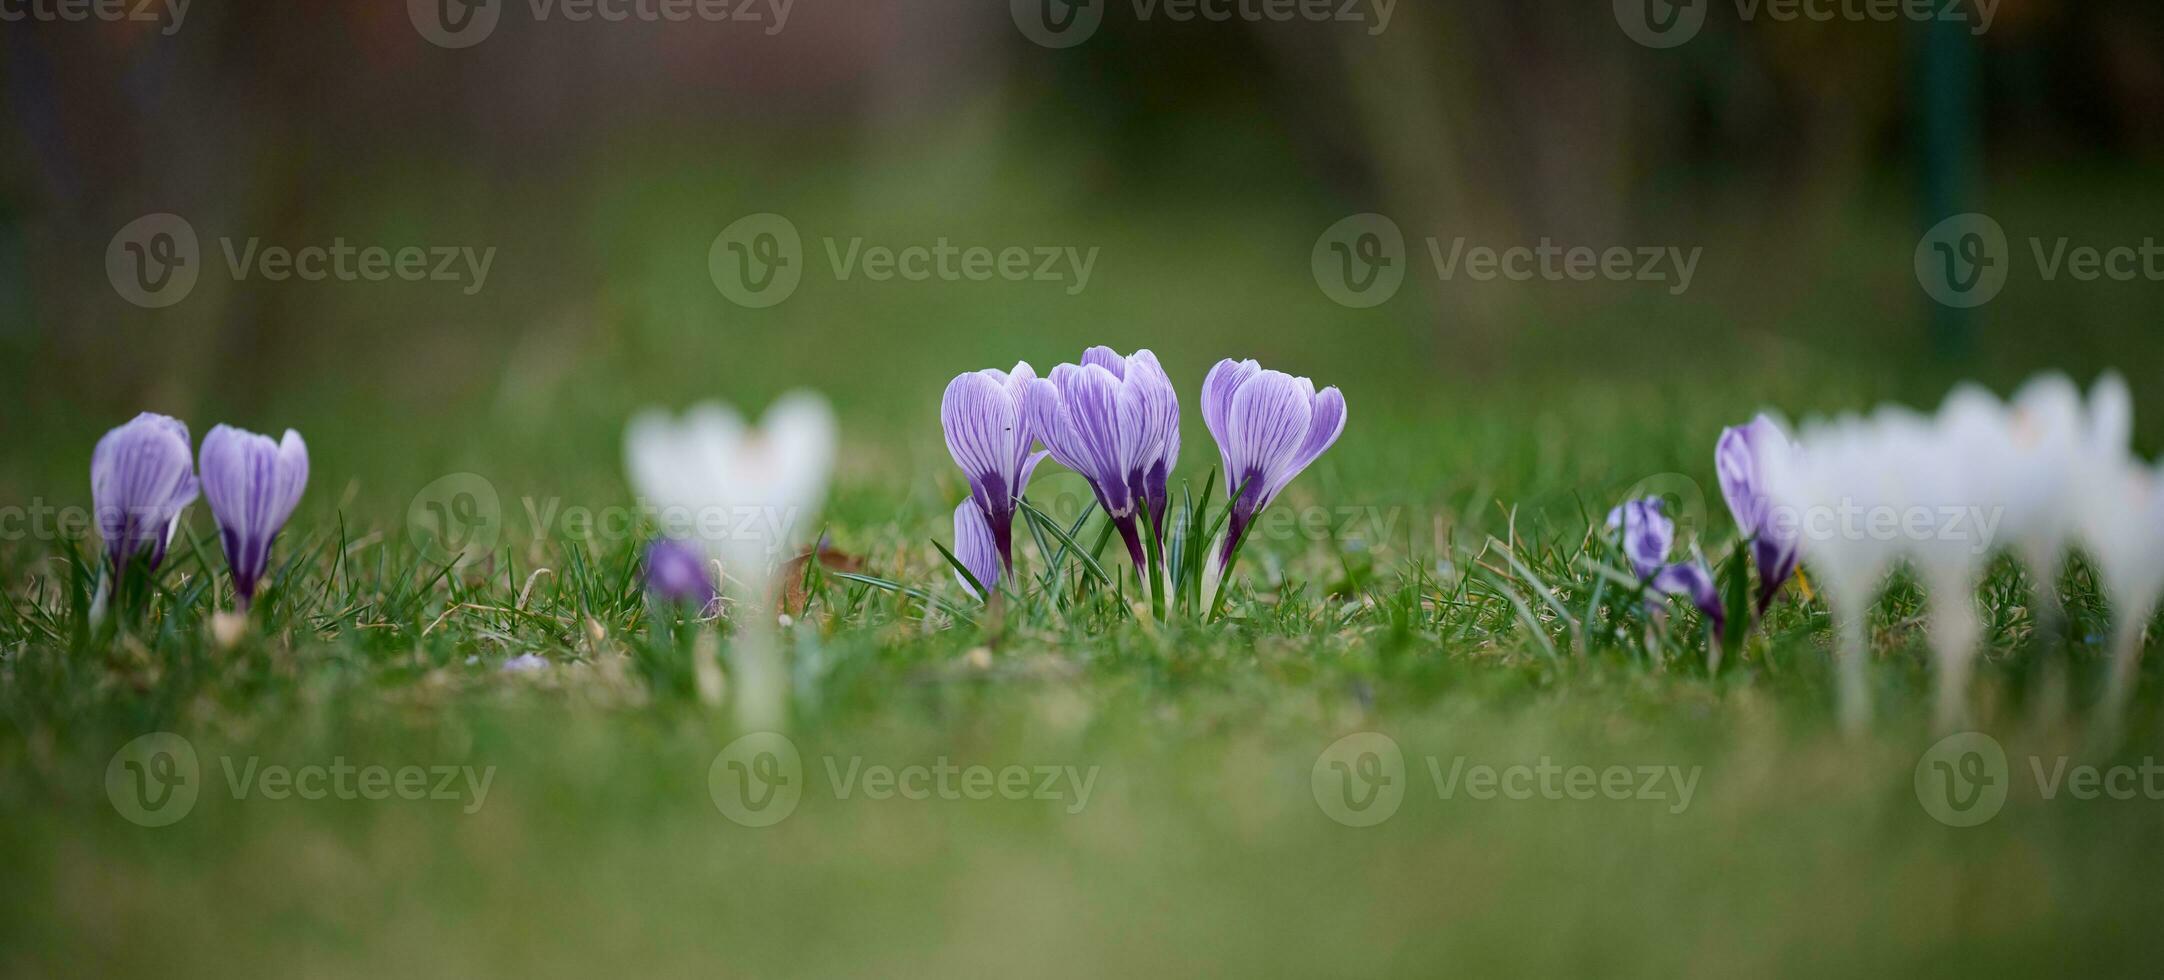 Blooming purple crocuses with green leaves in the garden, spring flowers photo